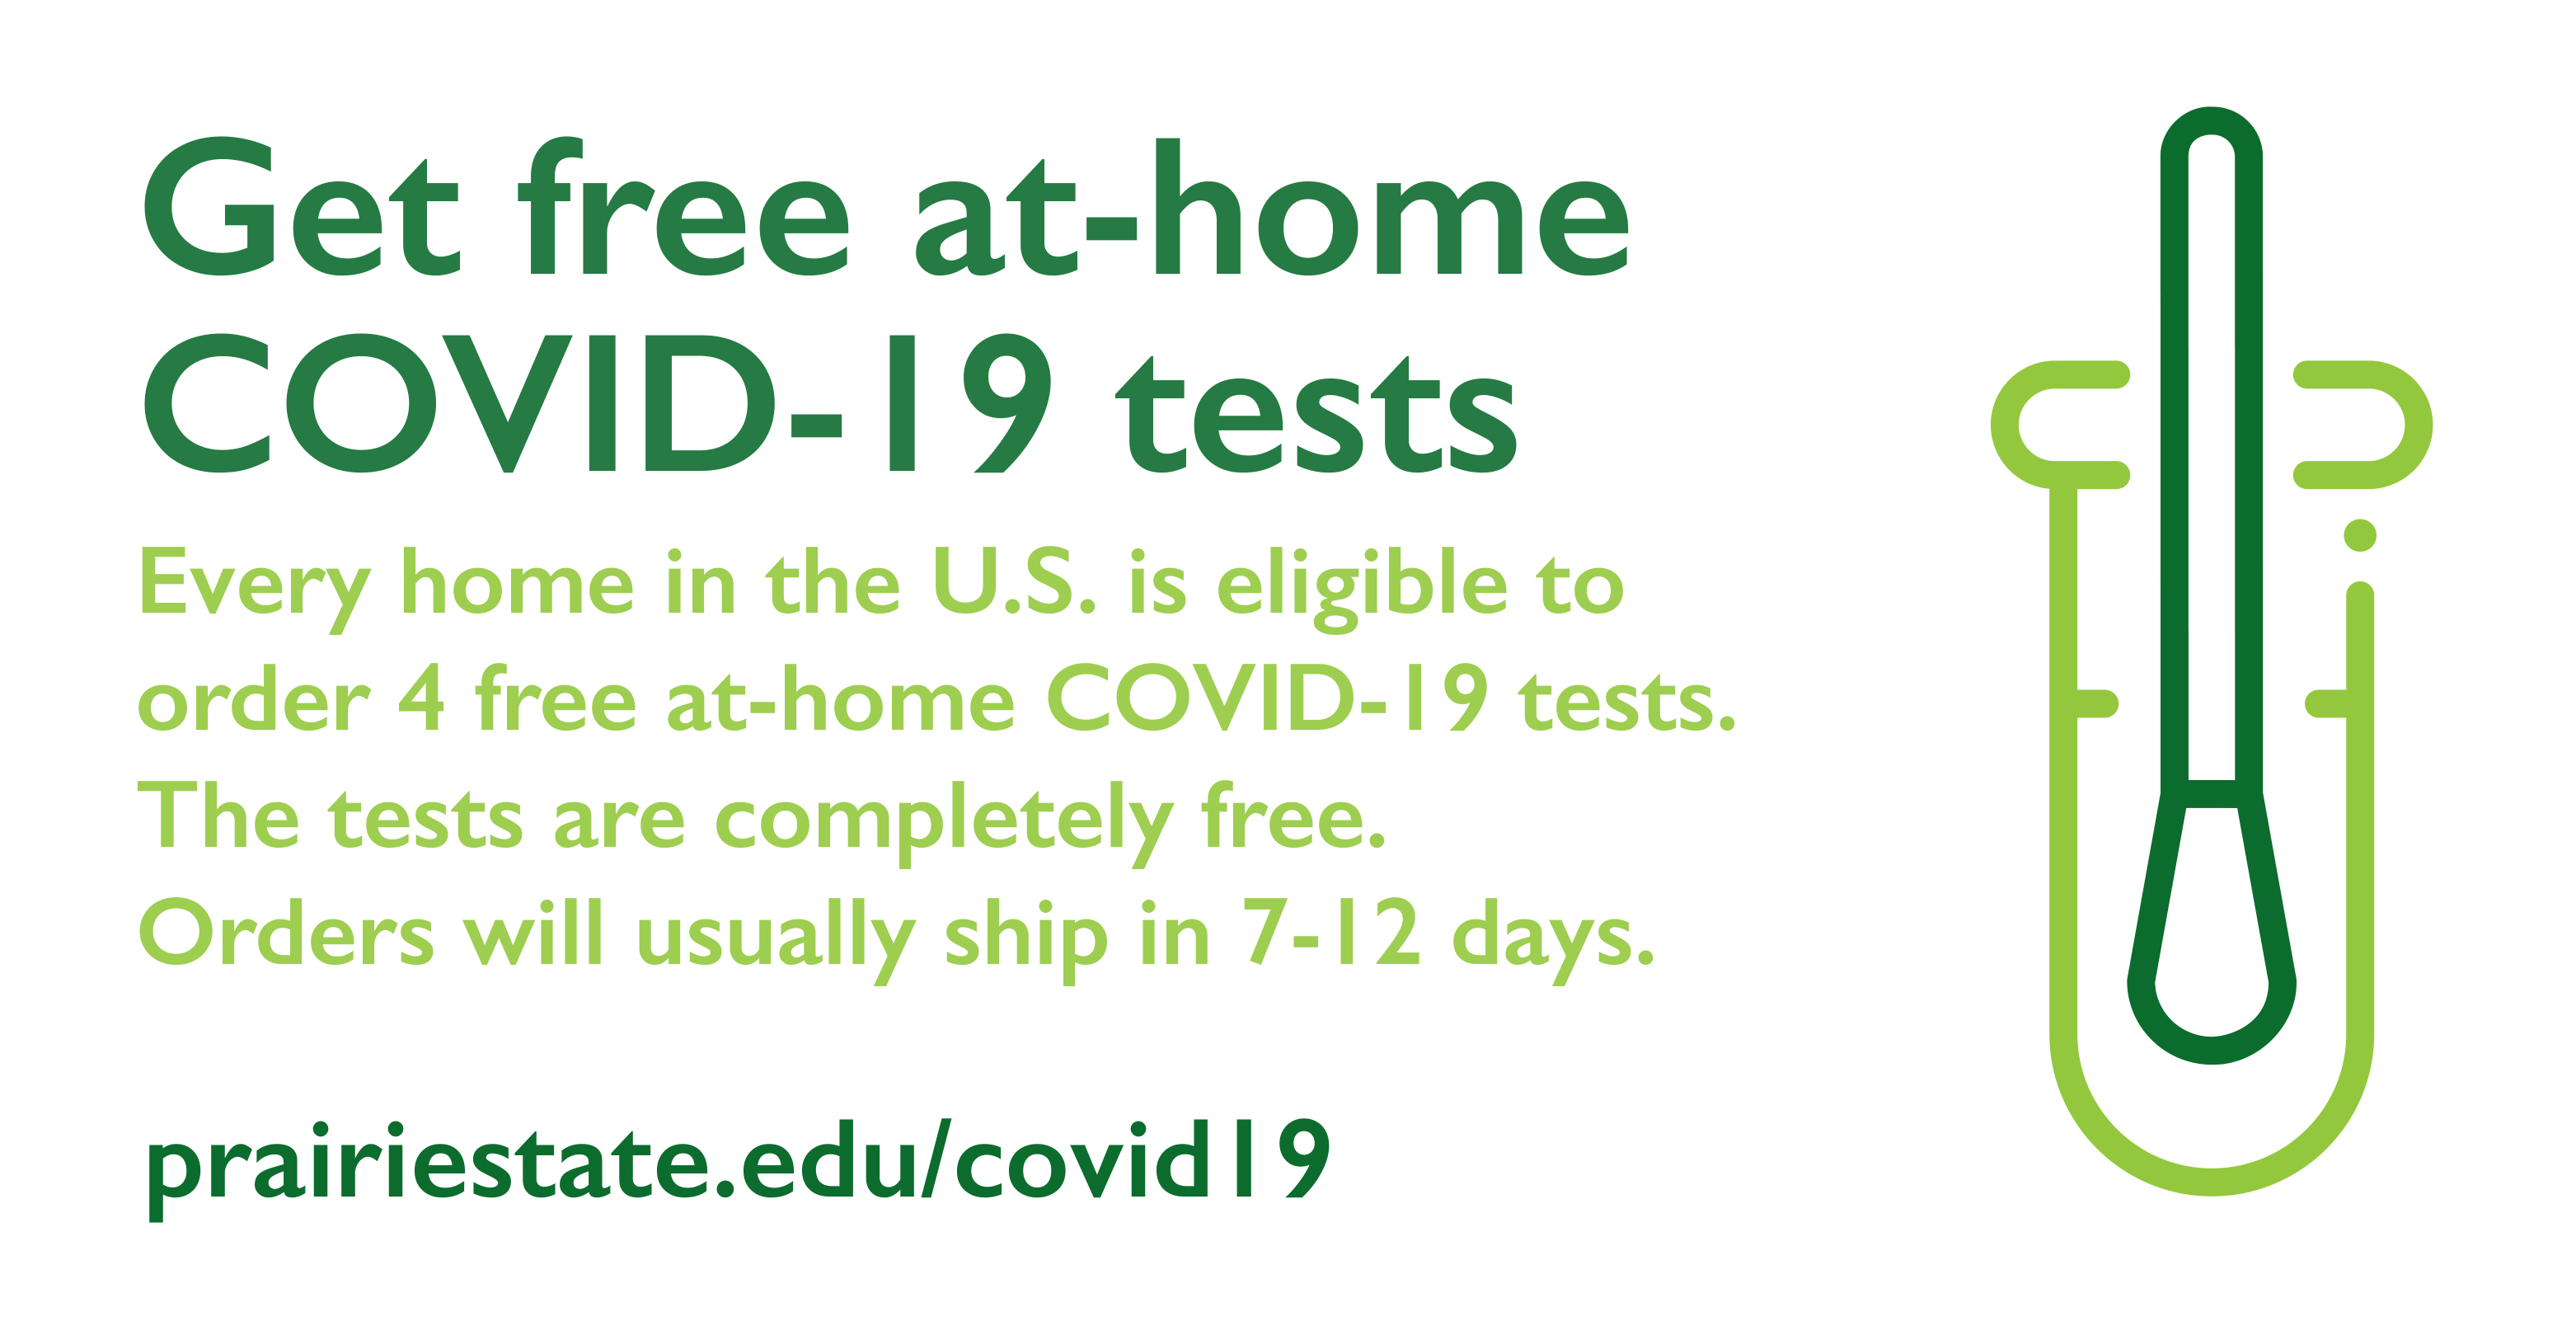 Get free at-home COVID-19 tests. Every home in the U.S. is eligible to order 4 free at-home COVID-19 tests. The tests are completely free. Orders will usually ship in 7-12 days.